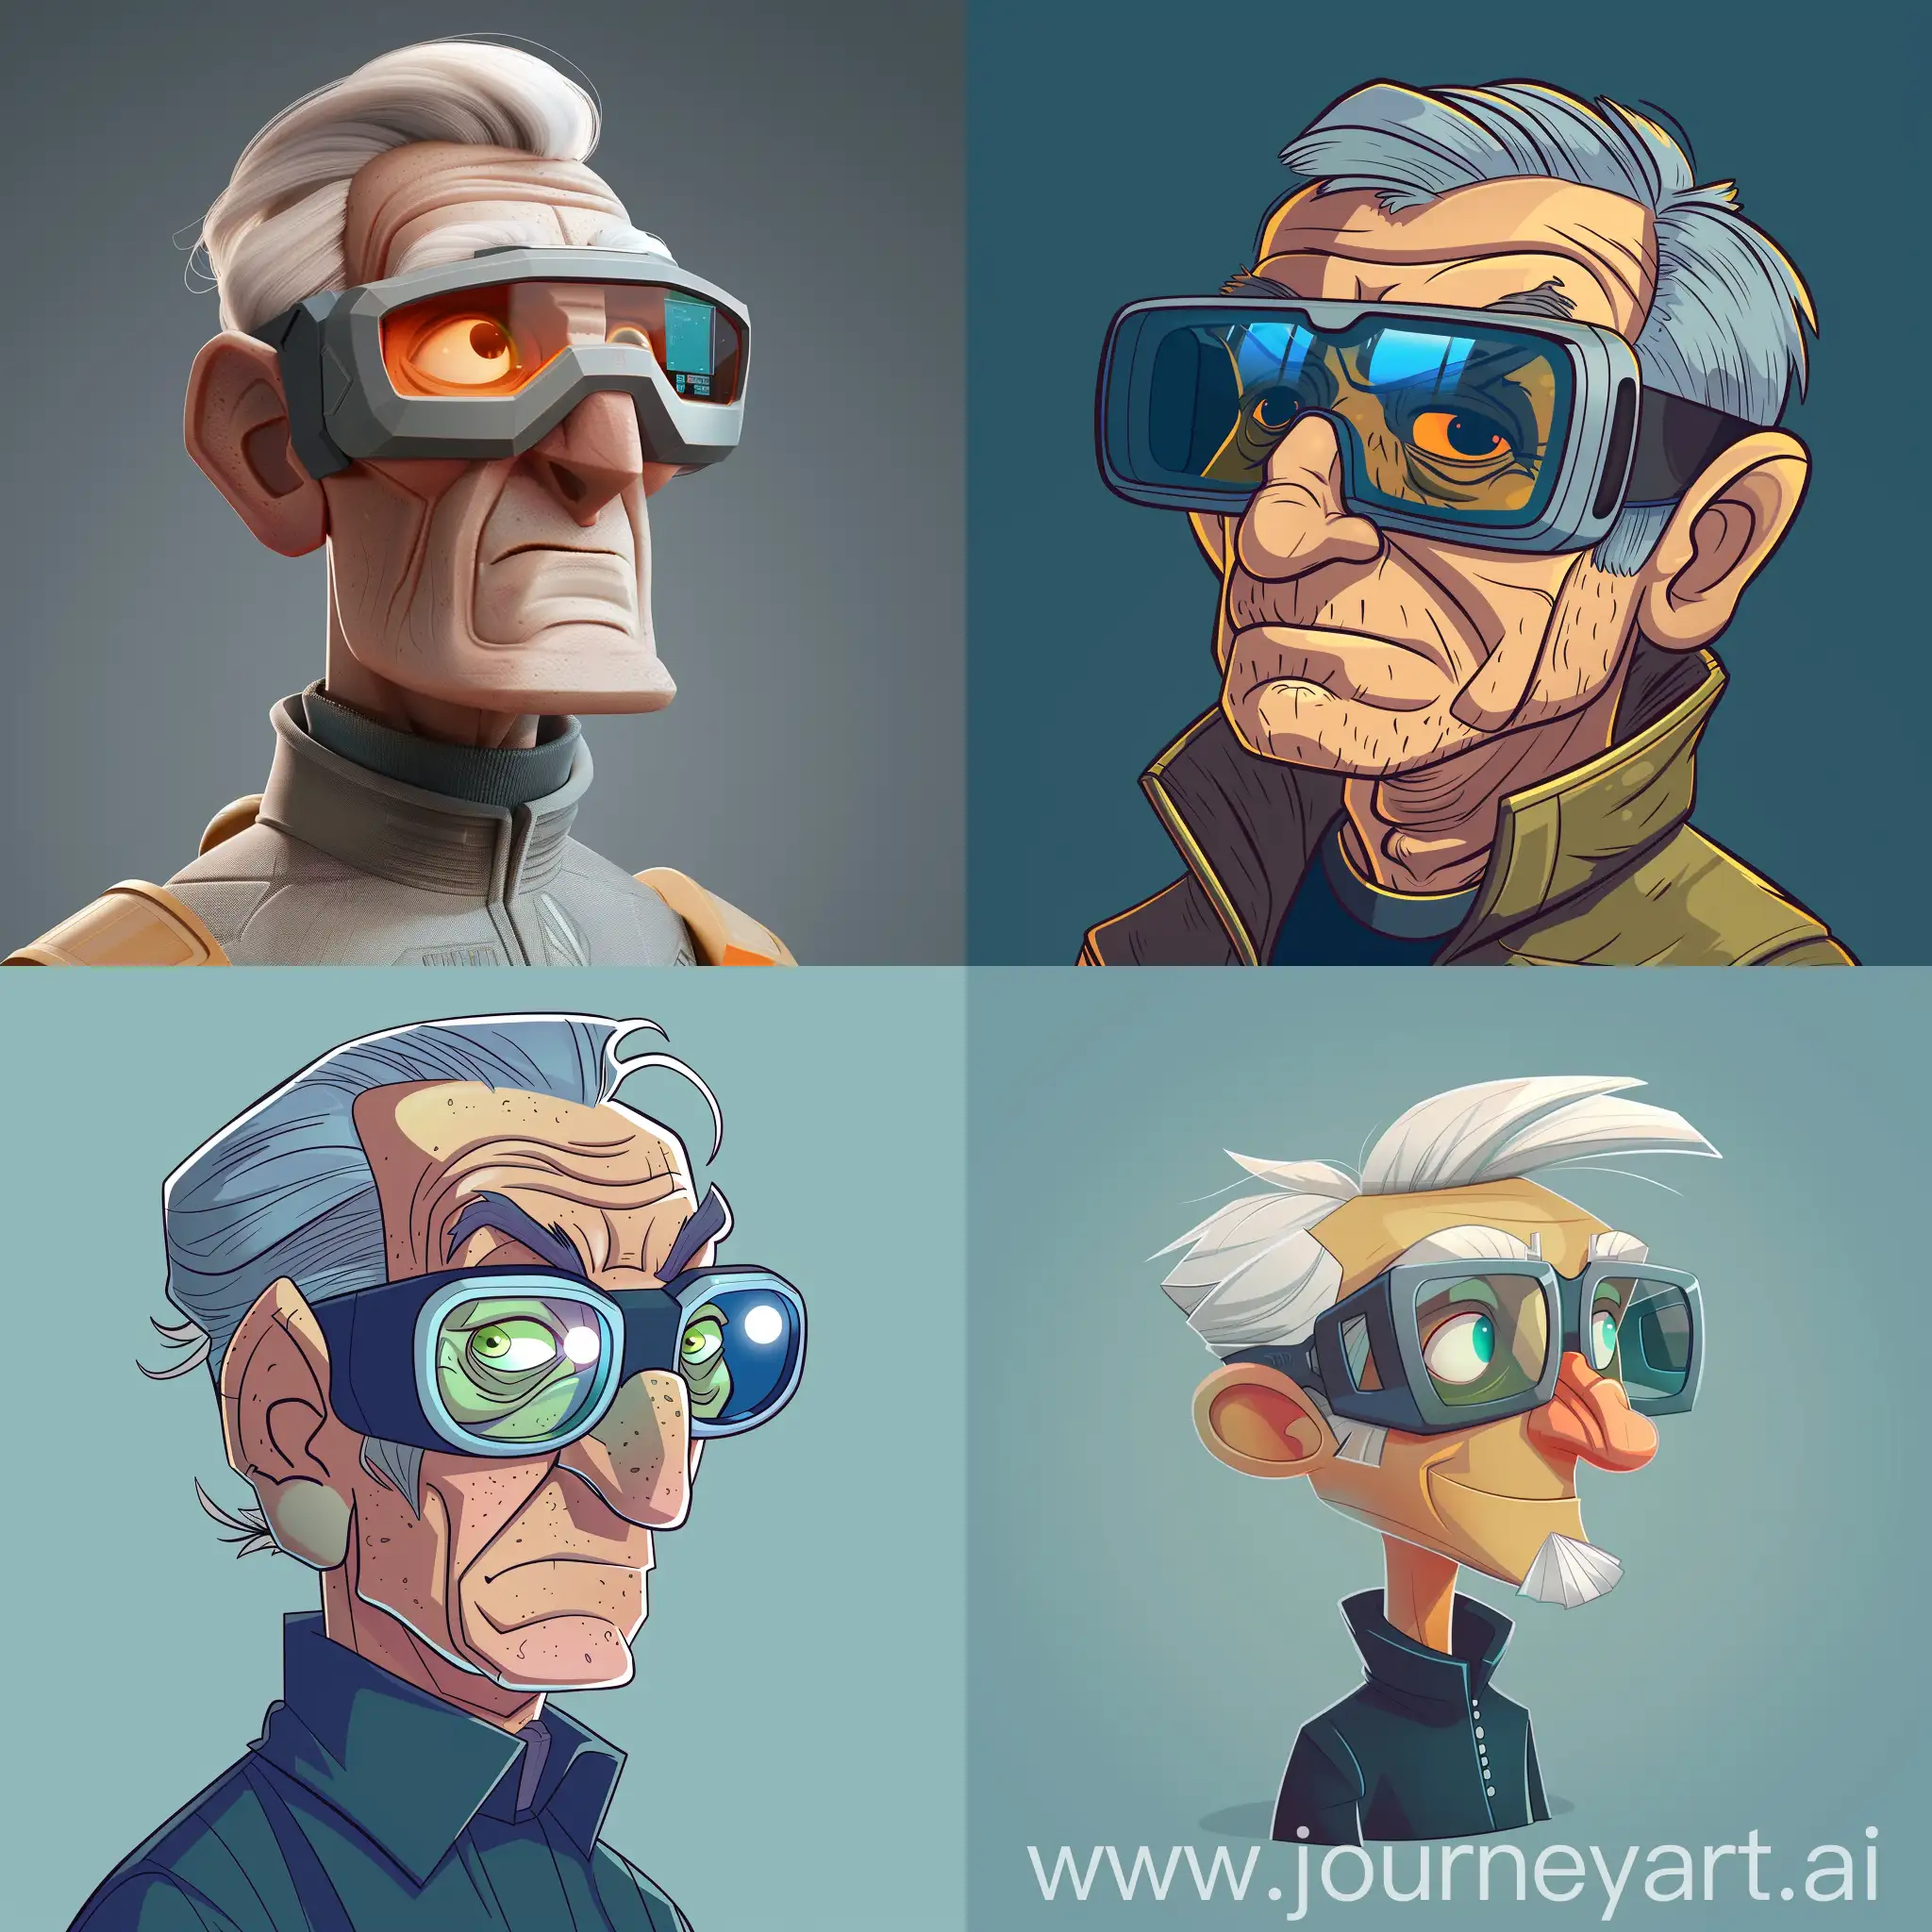 make a cartoony but non too cartoony smart man with scifi glasses and make ih like 45 years old and dont make him too old